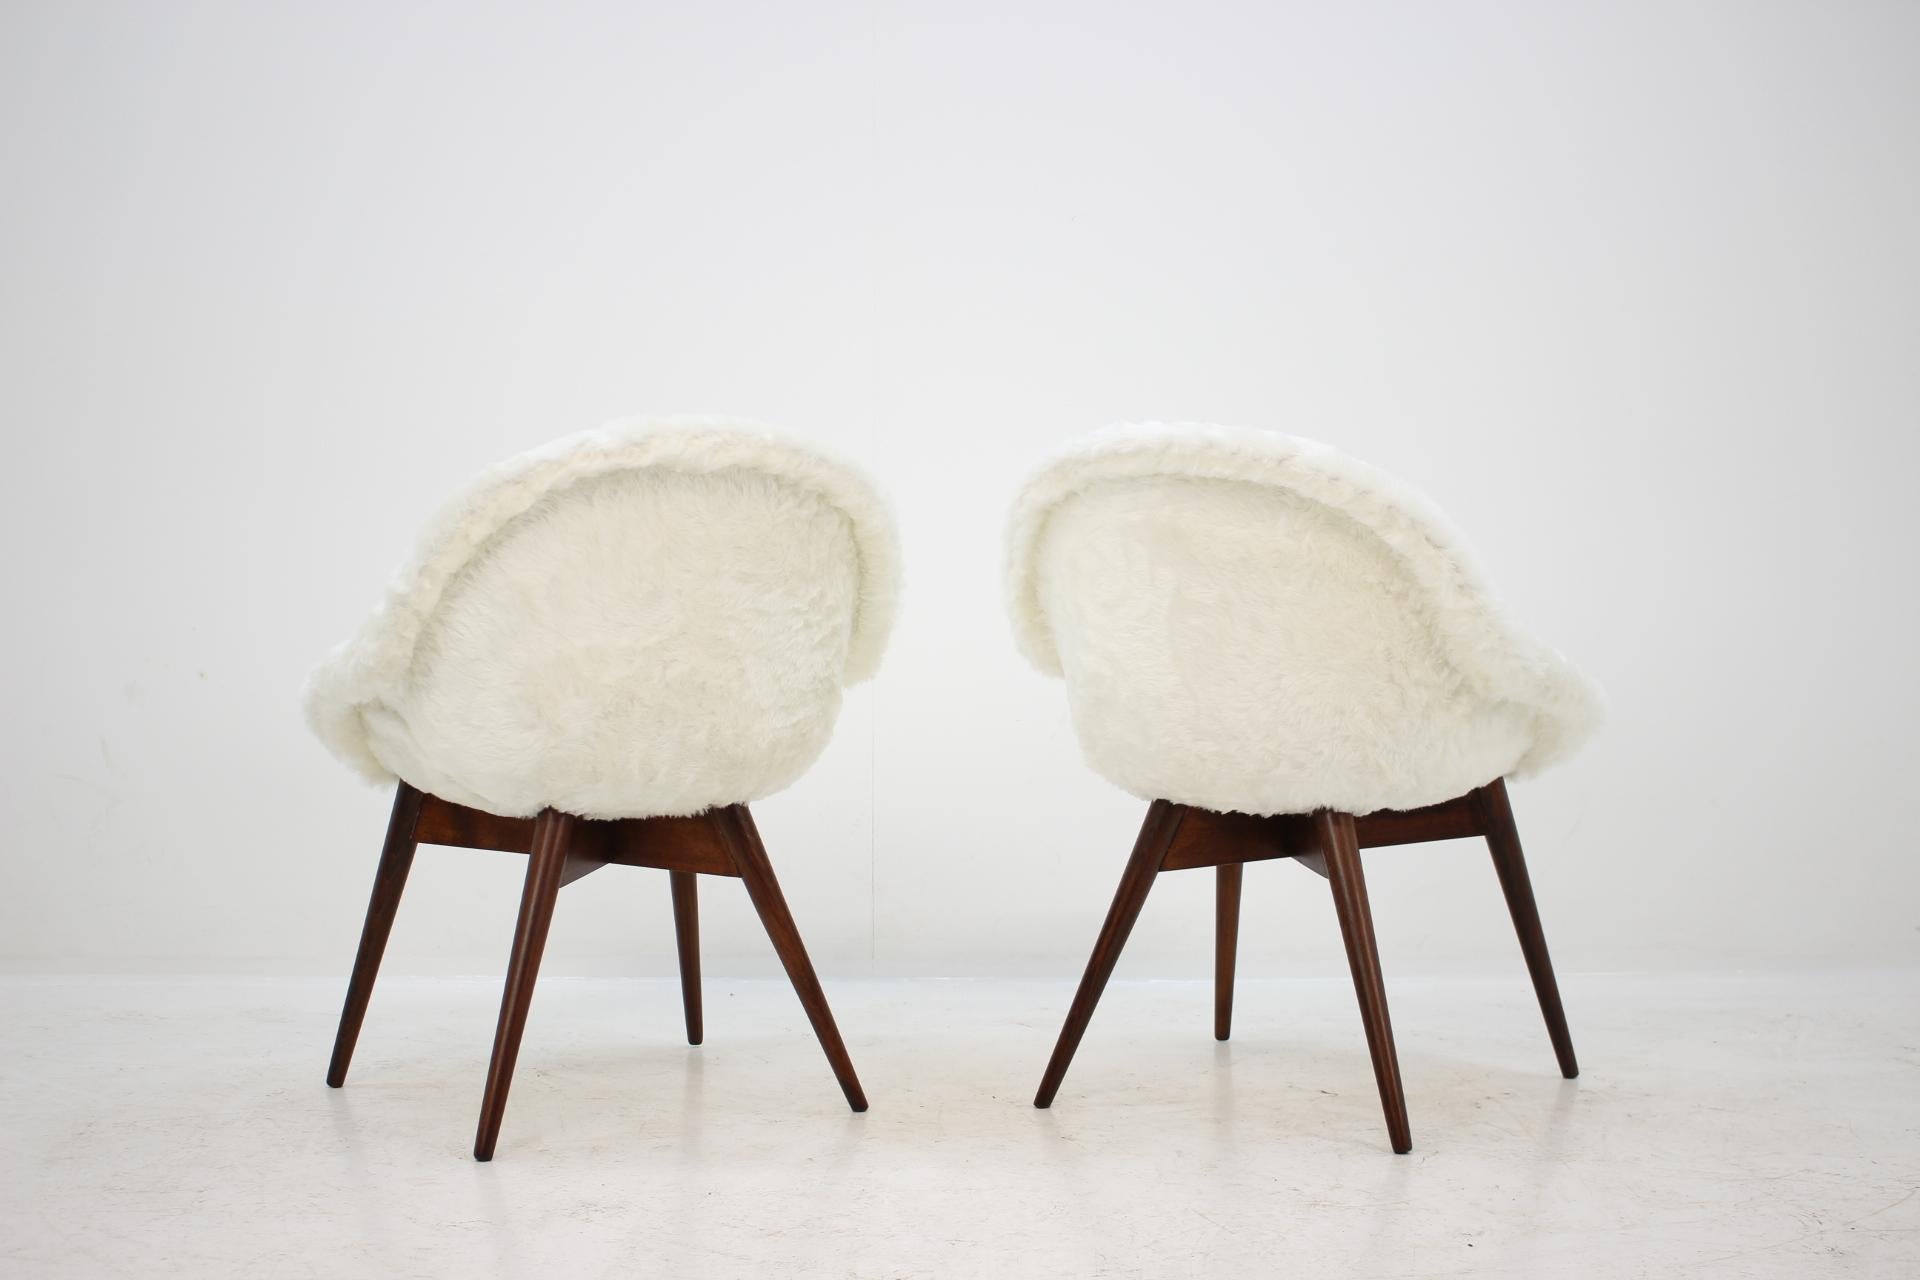 Czech Pair of Two Lounge Chairs by Miroslav Navratil, 1960s For Sale